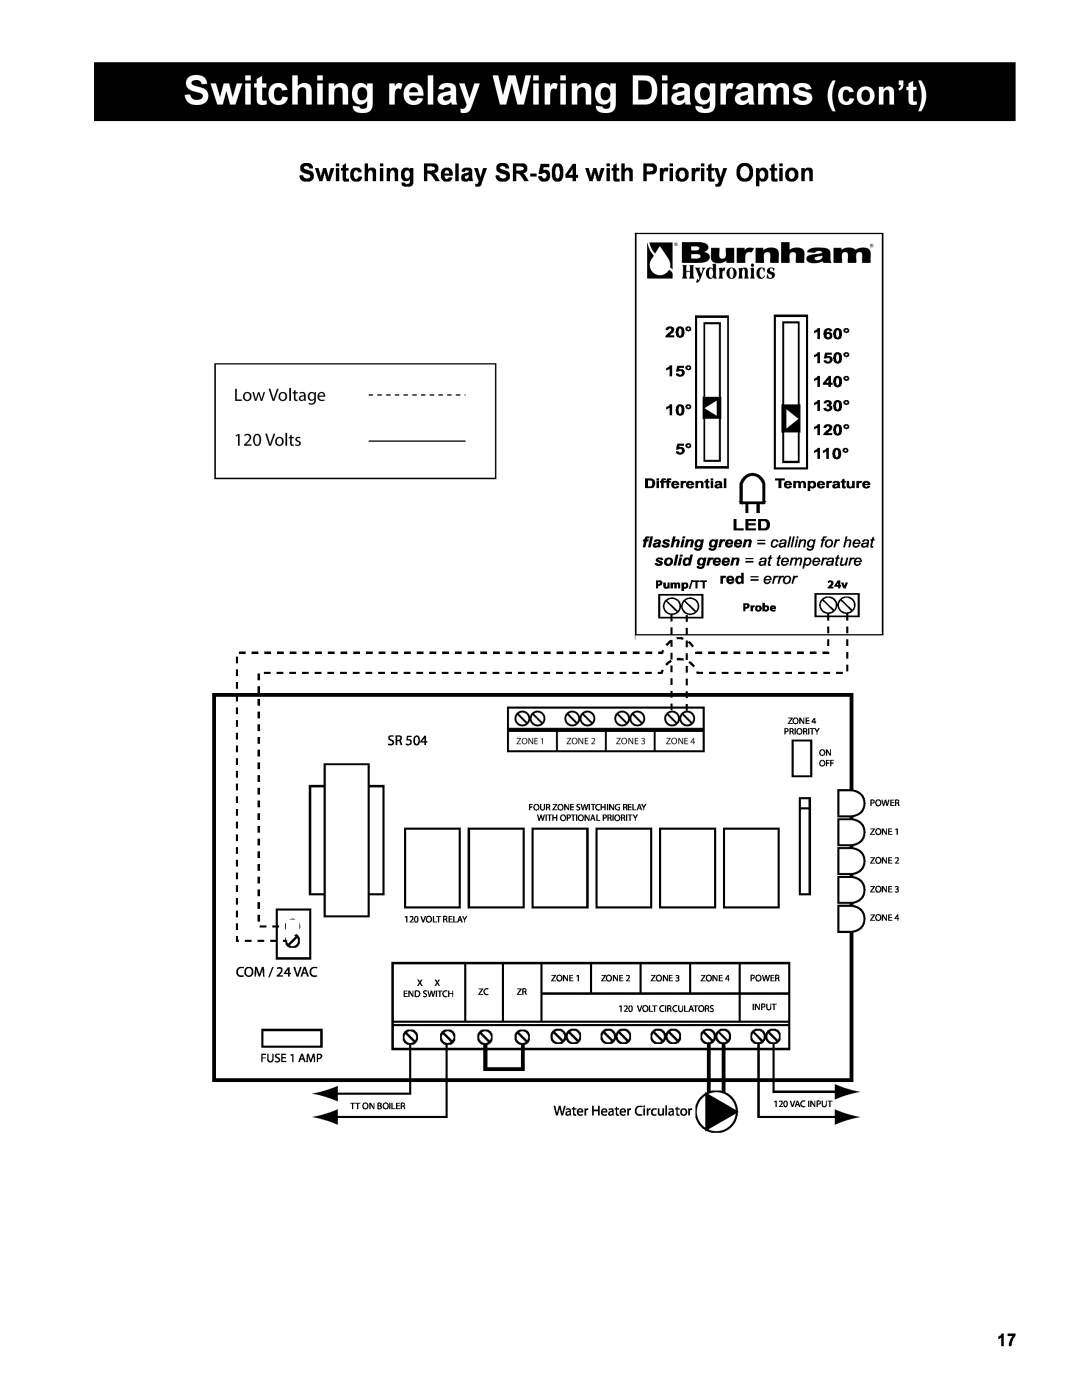 Burnham AL SL Switching relay Wiring Diagrams con’t, Switching Relay SR-504with Priority Option, Low Voltage 120 Volts 